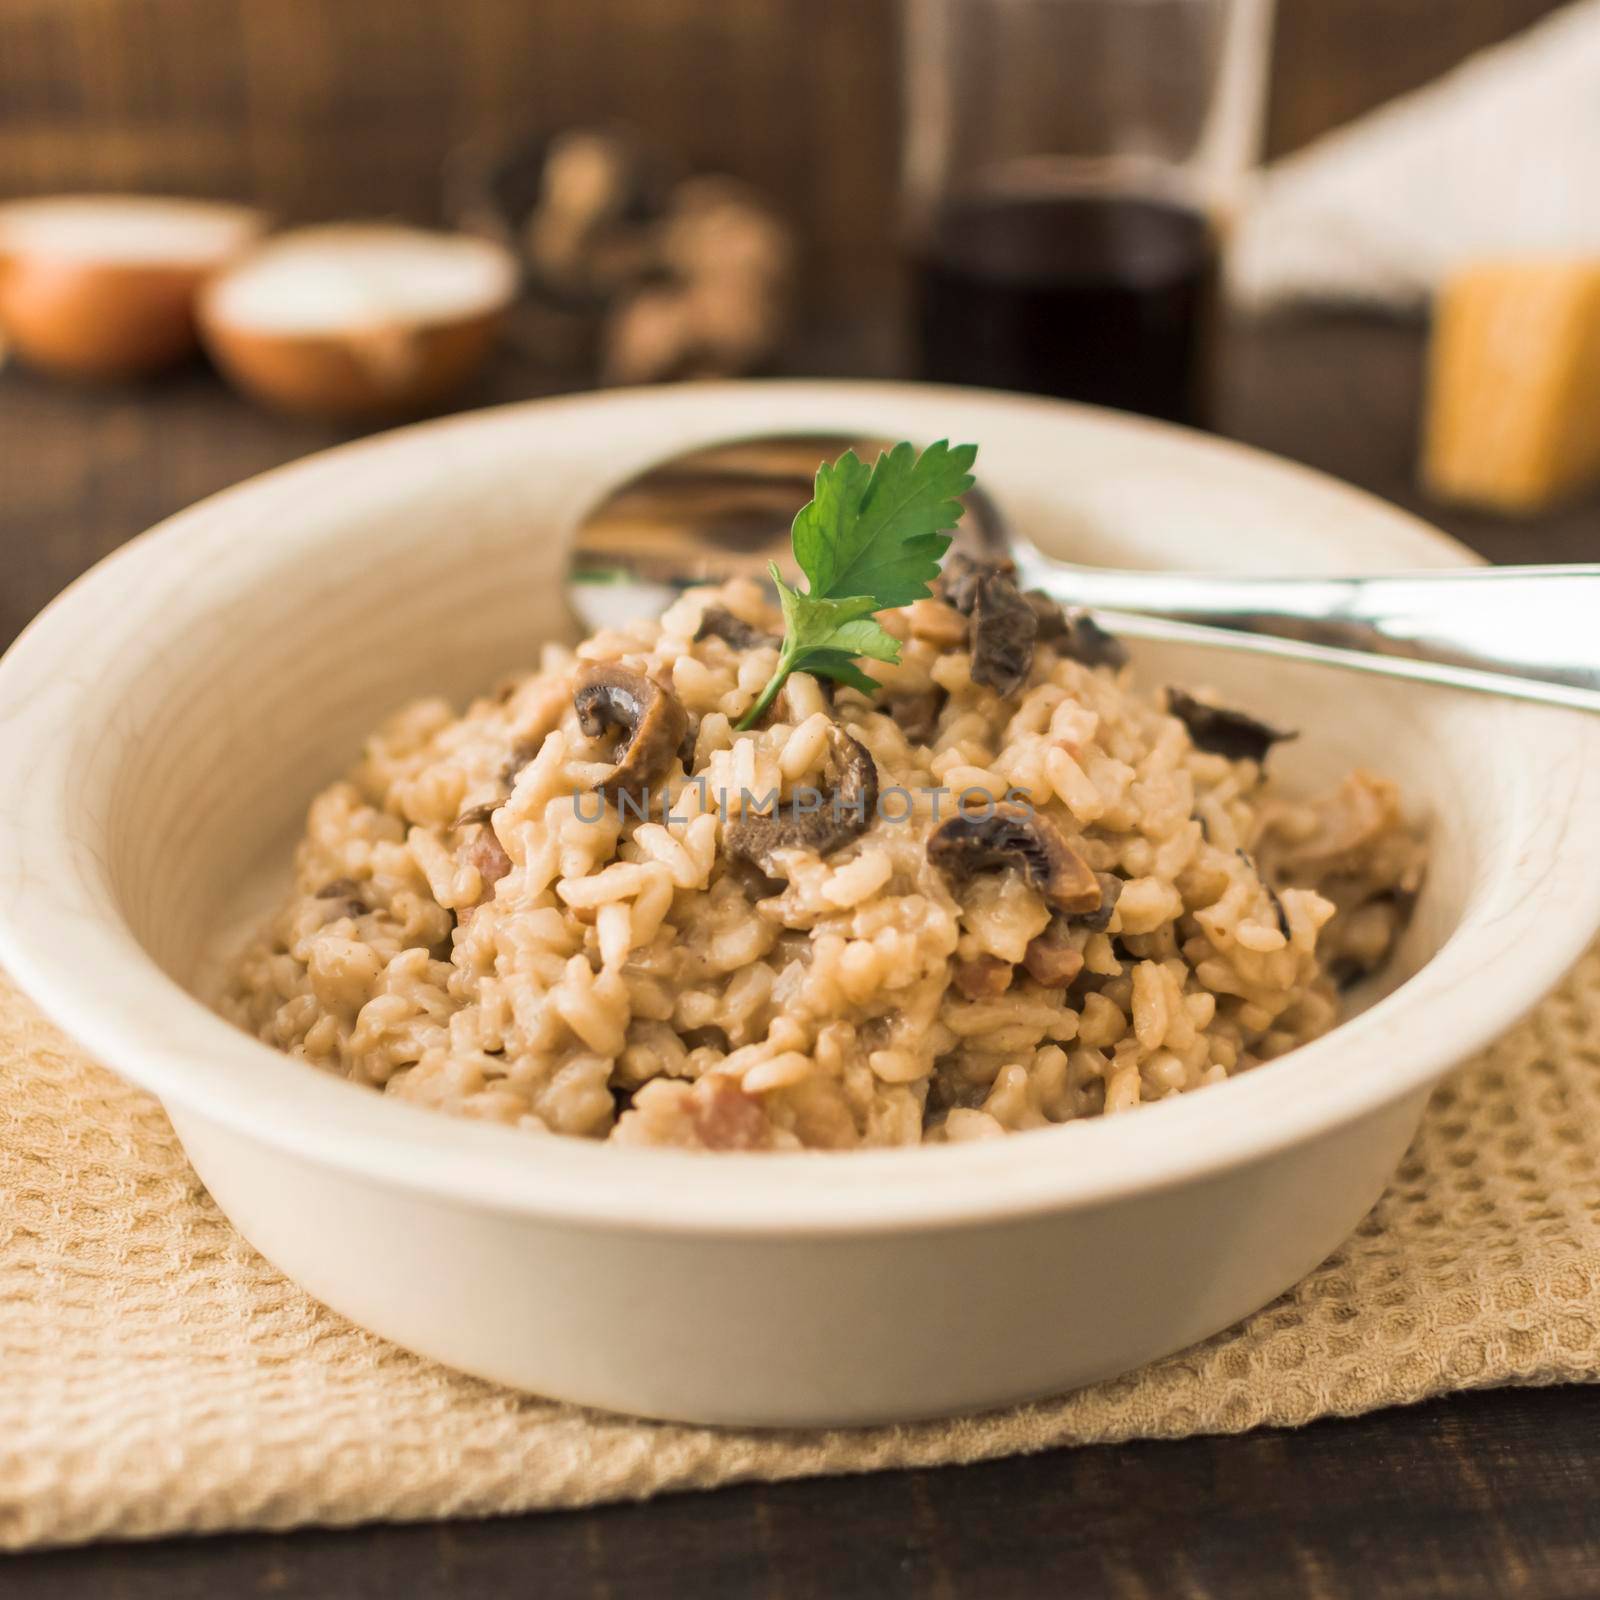 delicious mushroom risotto white bowl with spoon. High quality photo by Zahard